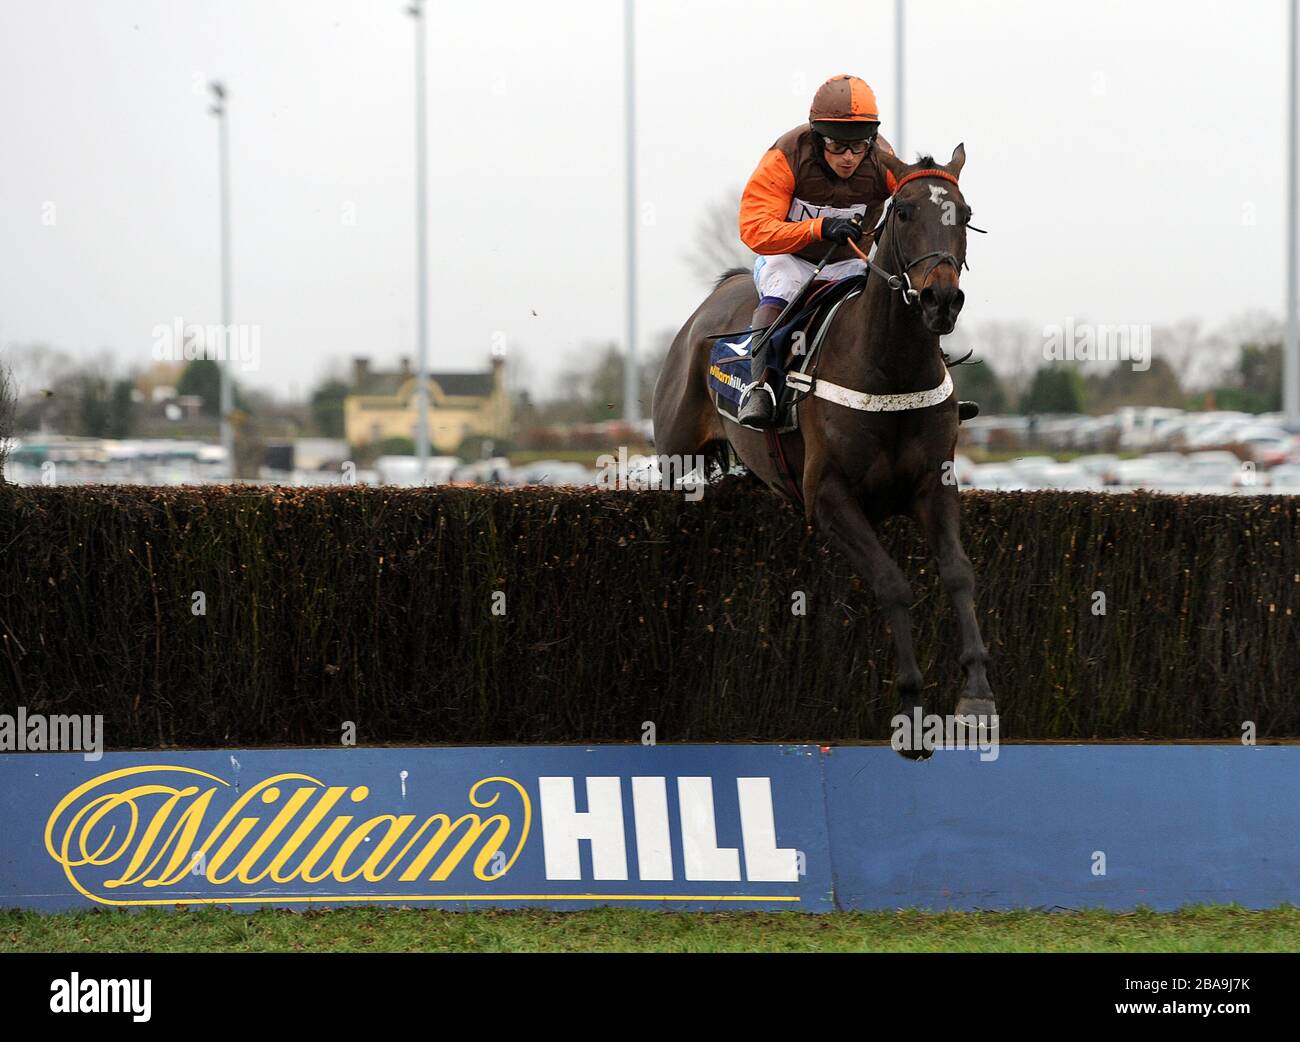 Rajdhani Express ridden by Sam Waley-Cohen during the William Hill - Download The App Novices' Handicap Chase Stock Photo